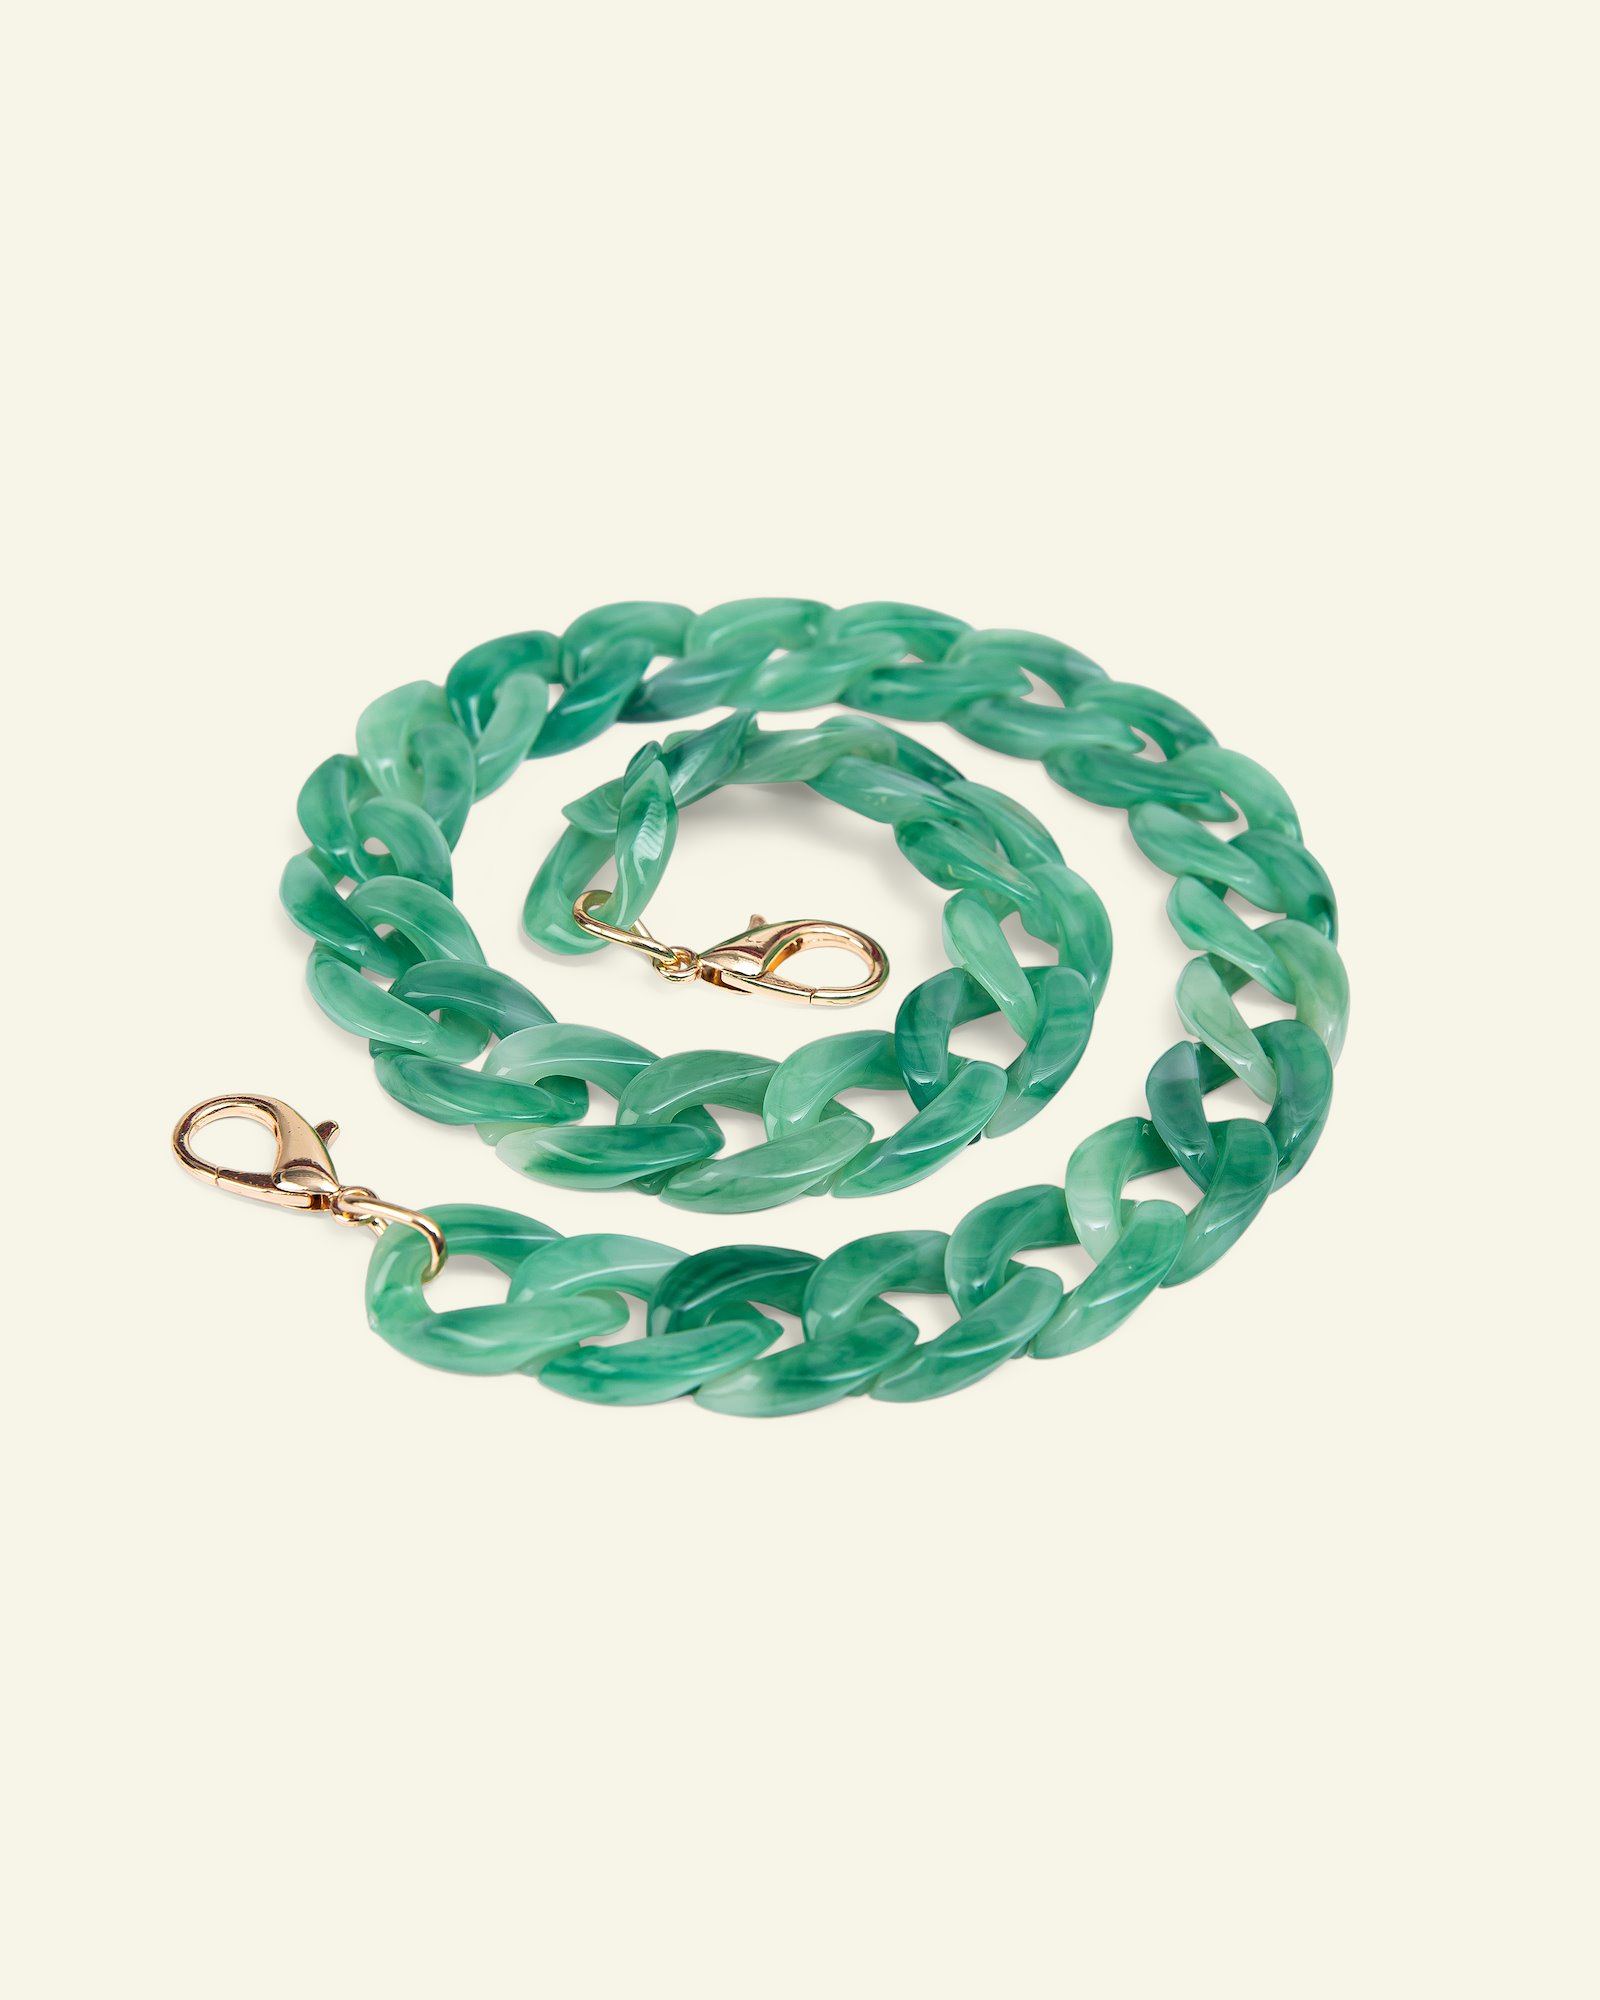 Chain handle 53cm green 1pc 46301_pack